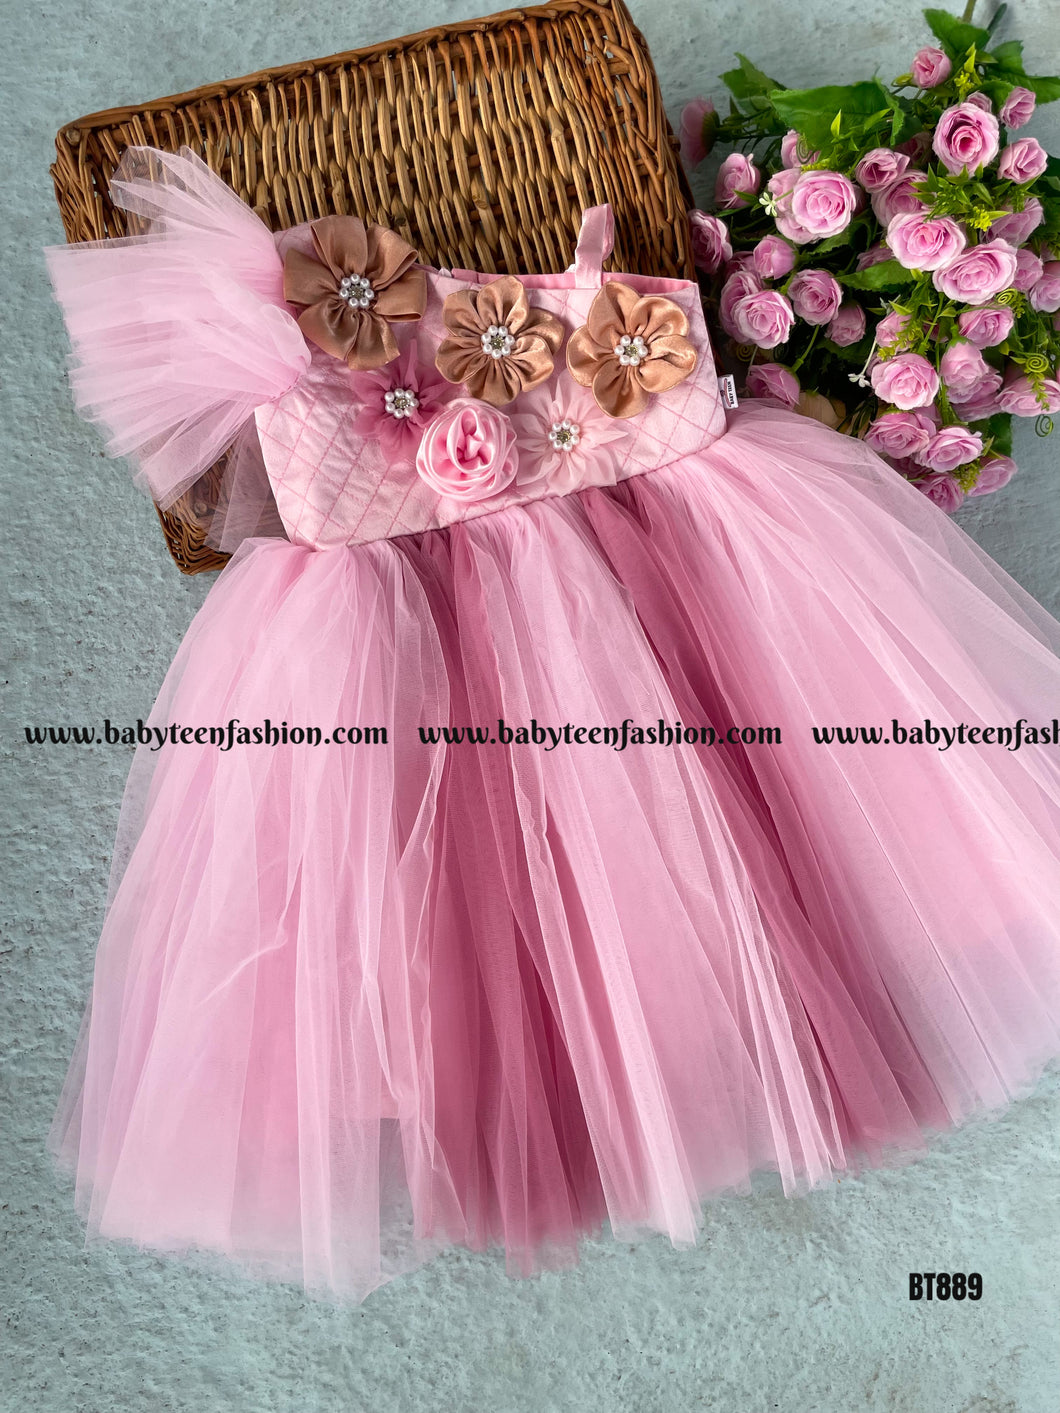 BT889 Blush Blossom Dress Twirl in a Garden of Delicate Pink